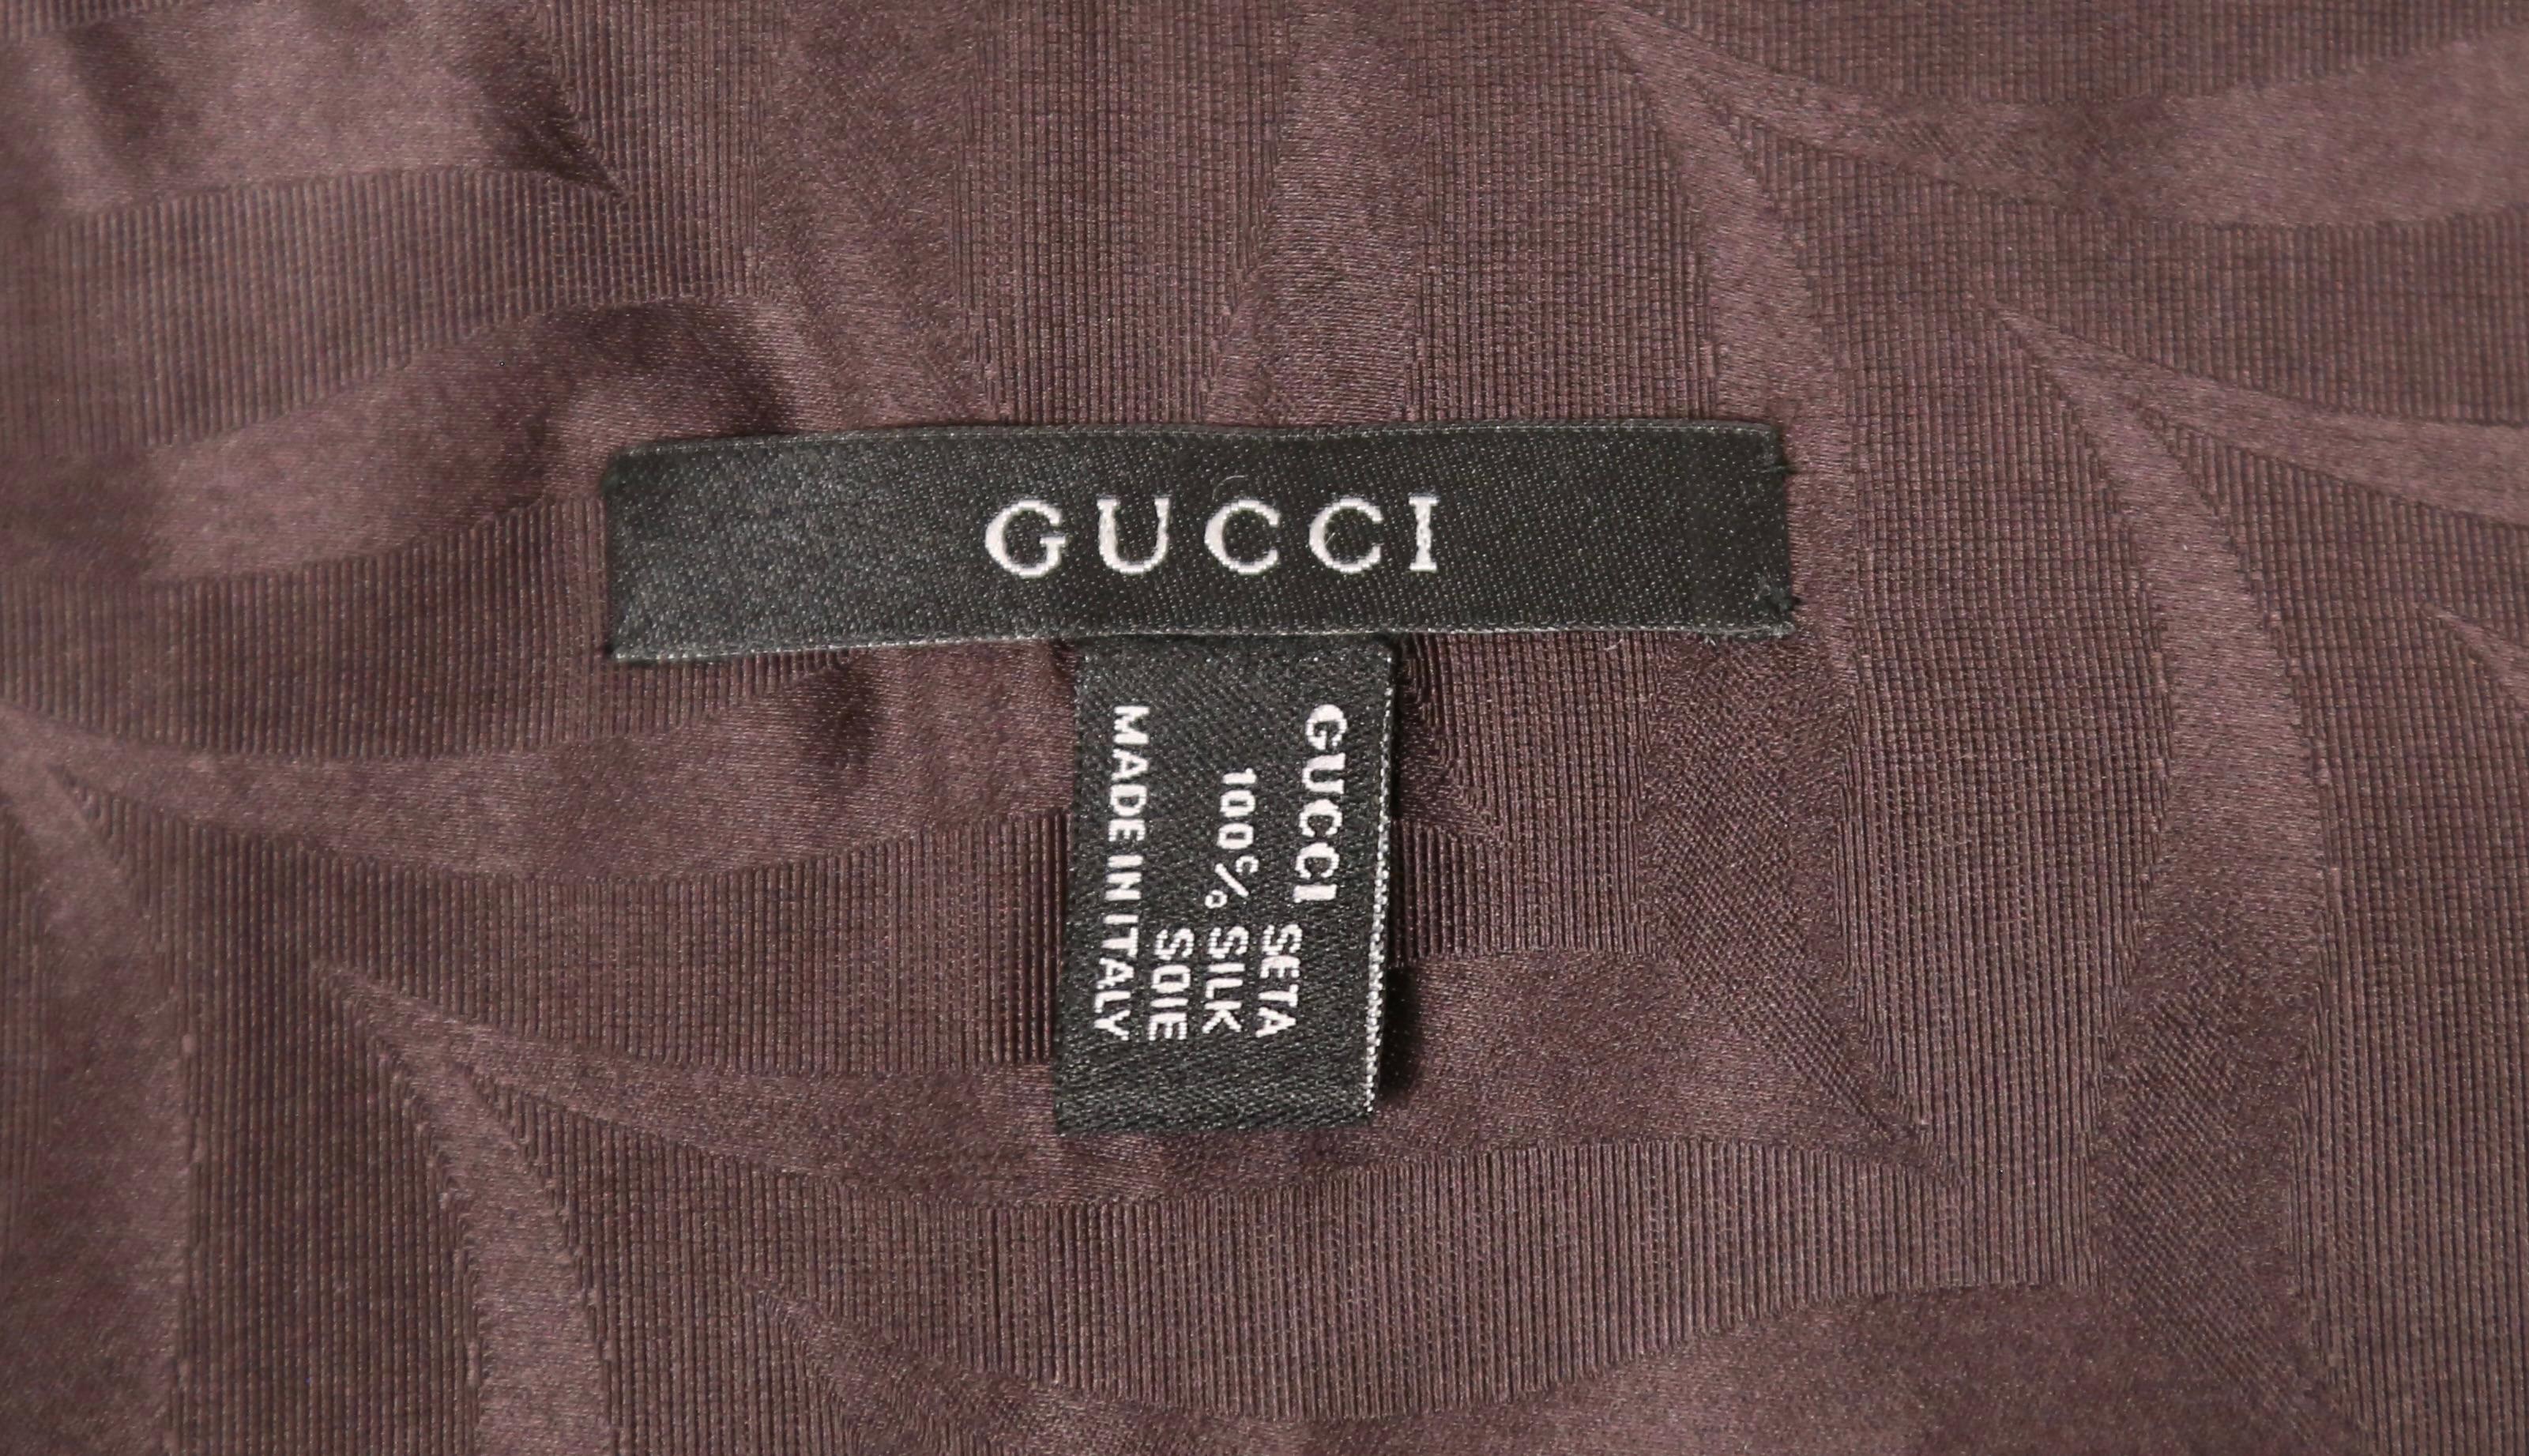 1996 TOM FORD for GUCCI black spazzalato leather belt with gilt buckle For Sale 1